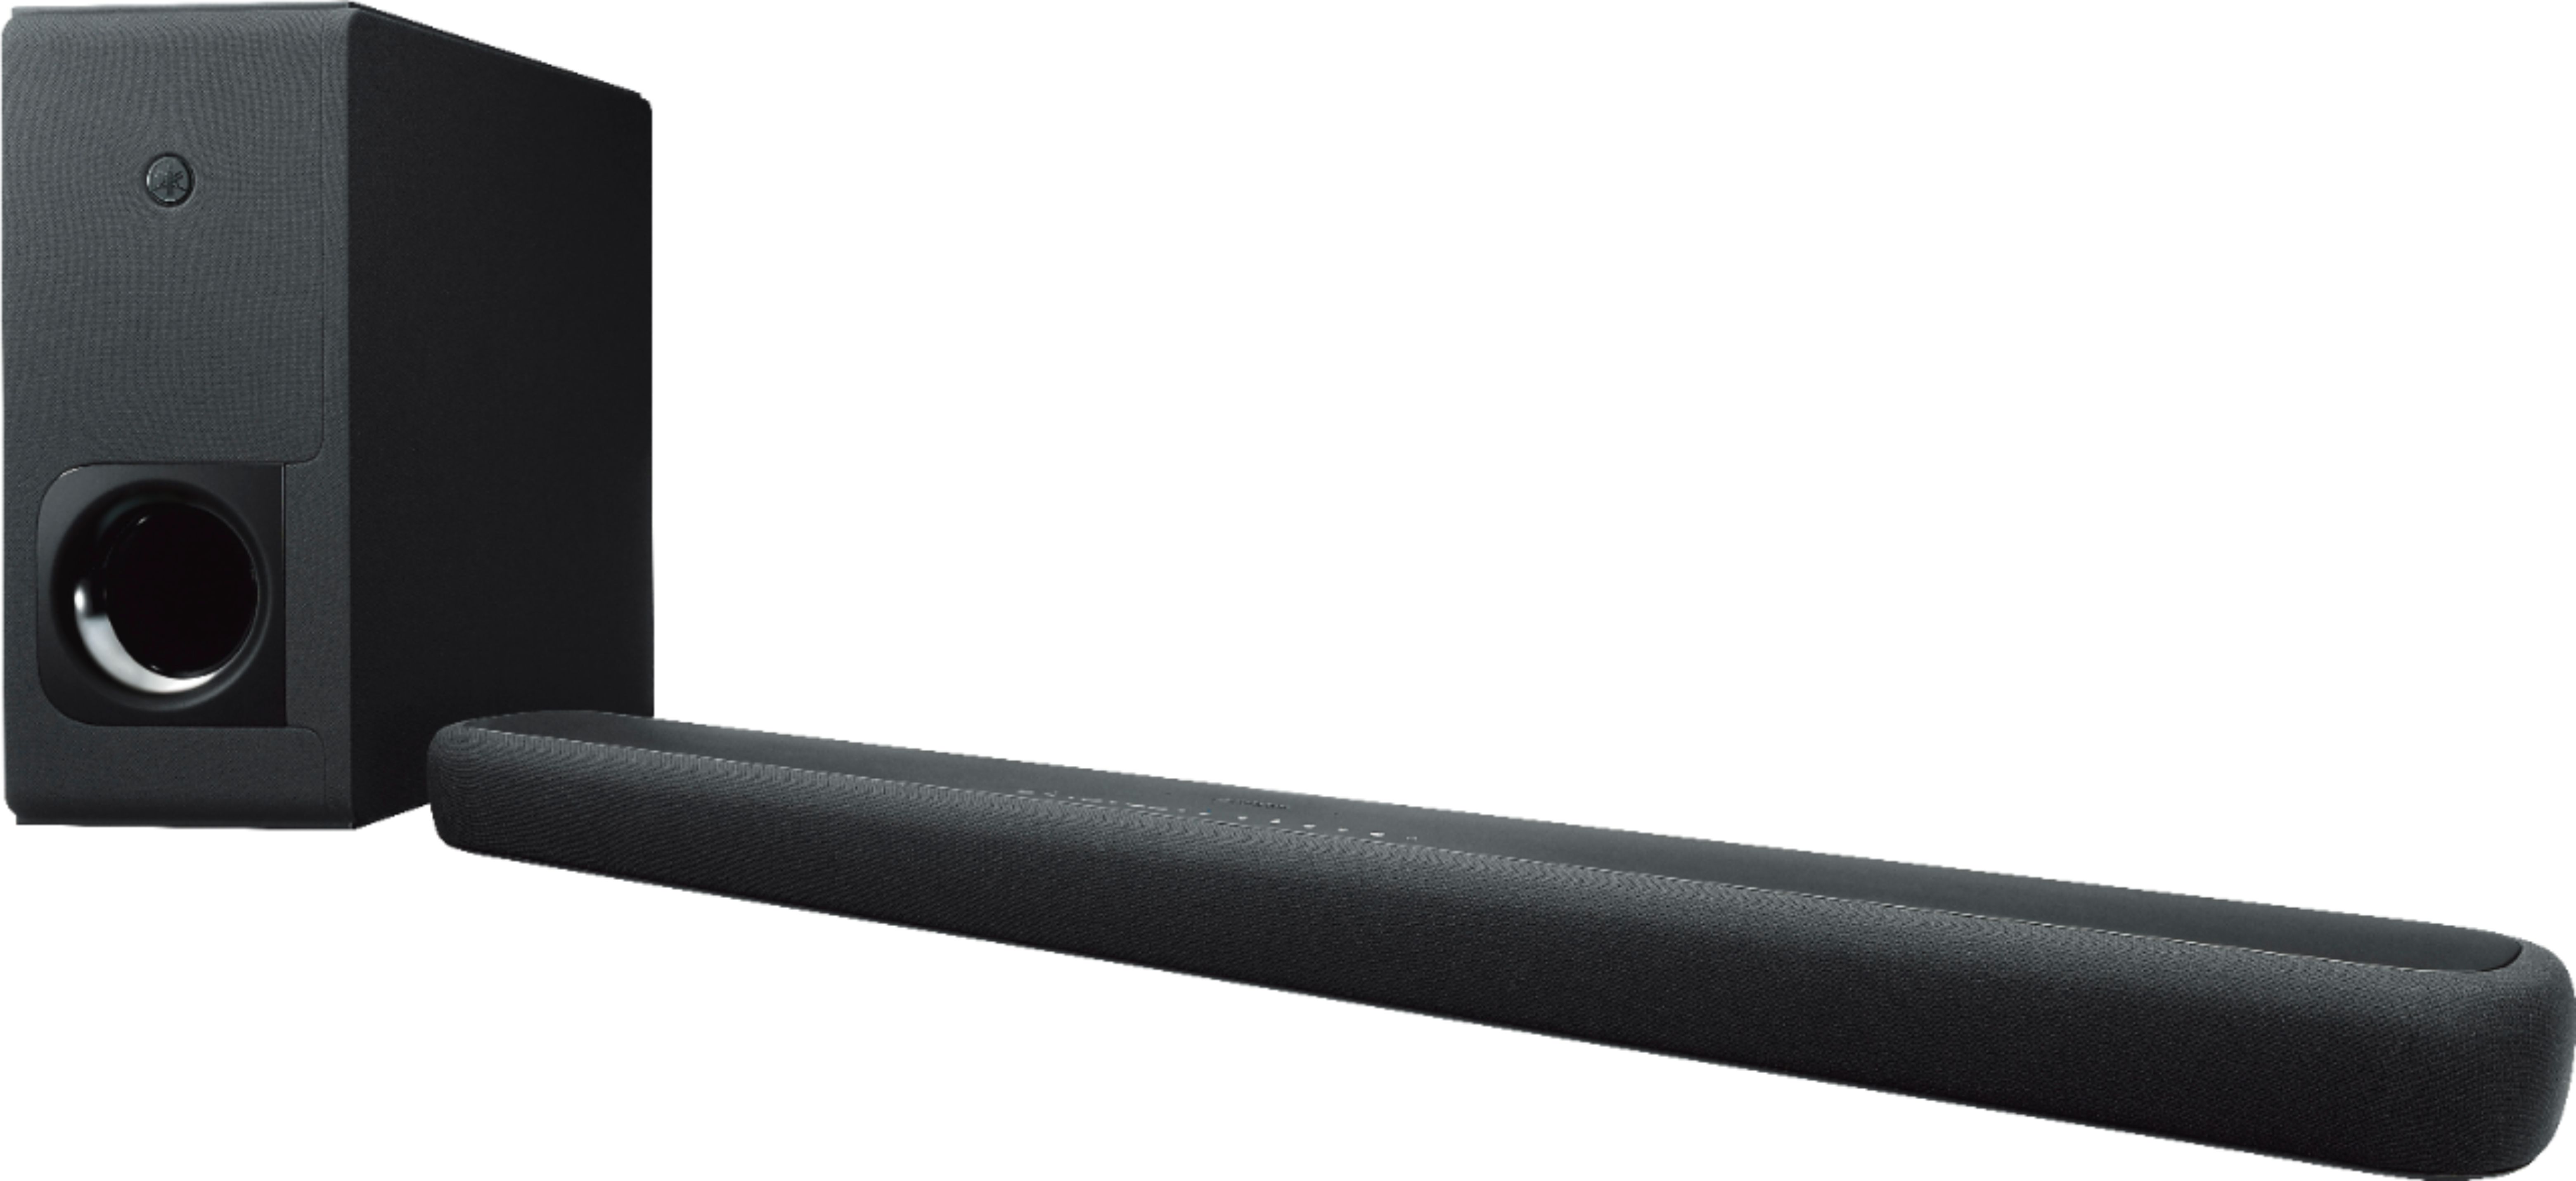 Left View: Yamaha - 2.1-Channel Soundbar with Wireless Subwoofer and Alexa Built-in - Black